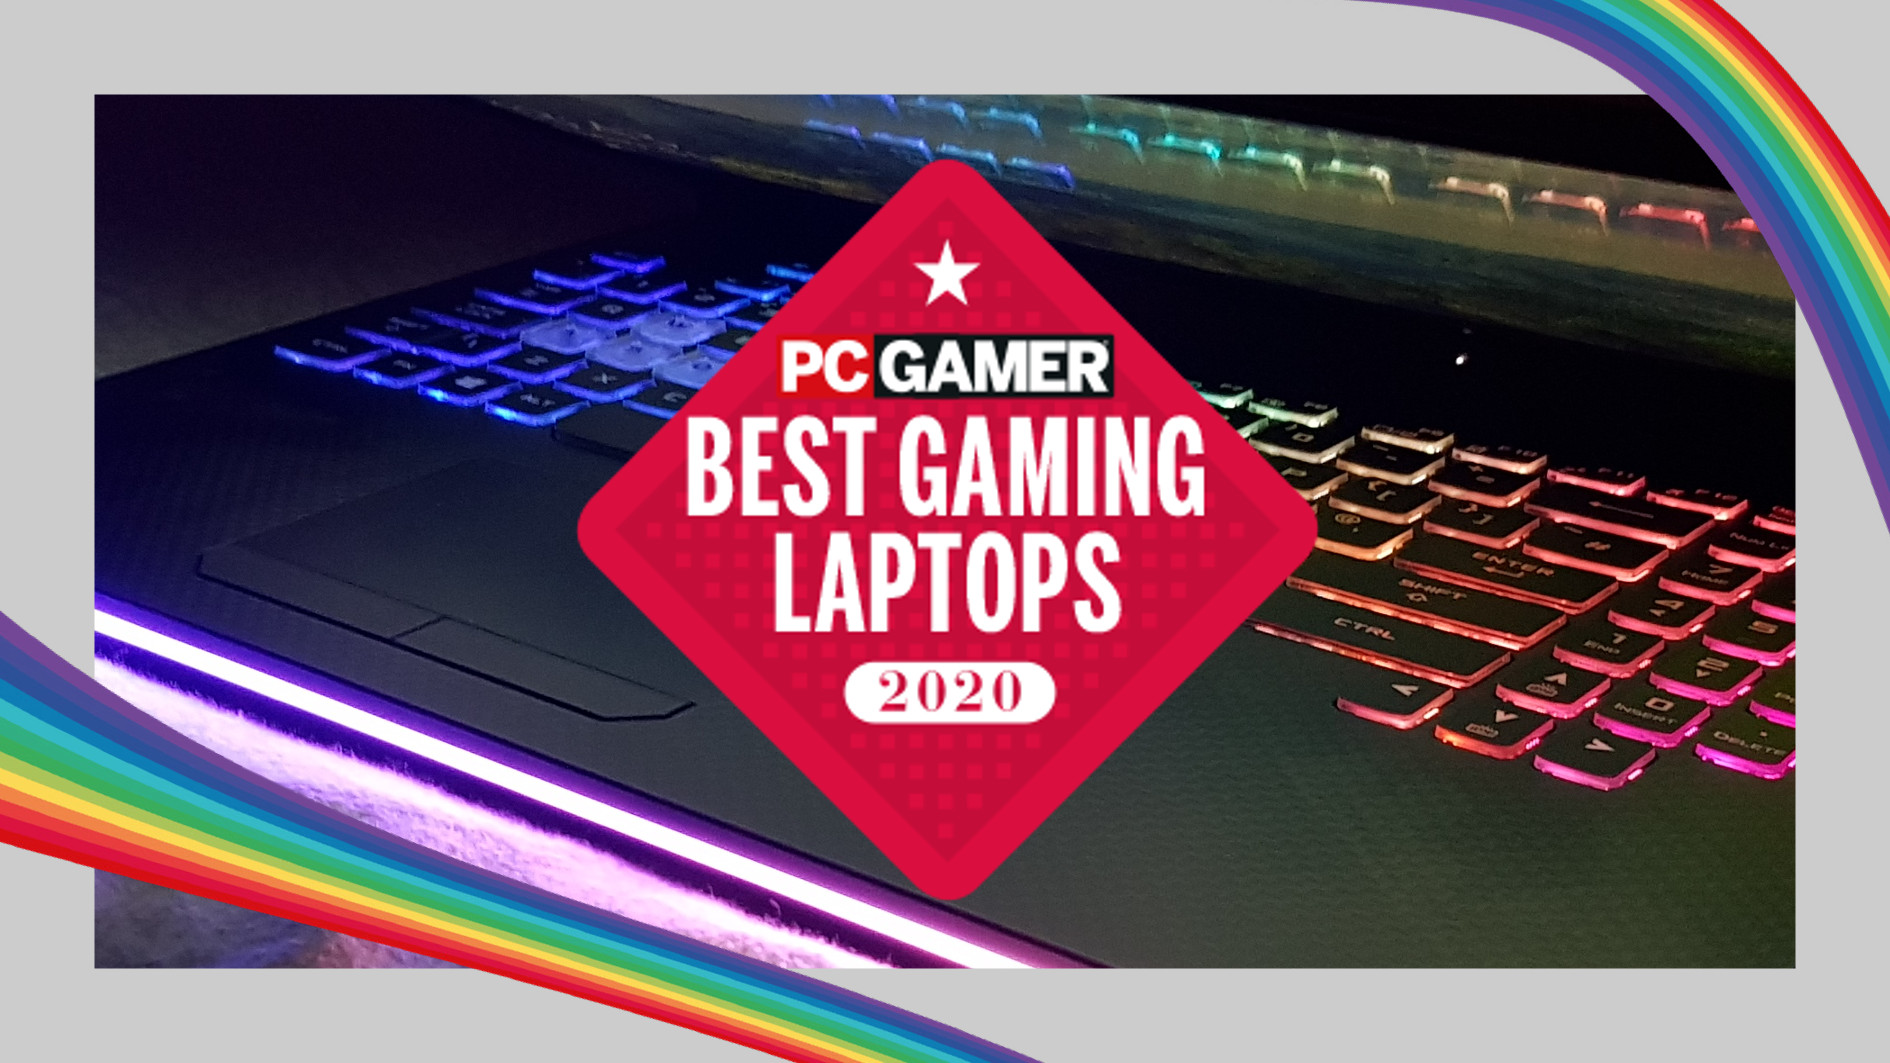  PC Gamer Hardware Awards: What is the best gaming laptop of 2020? 